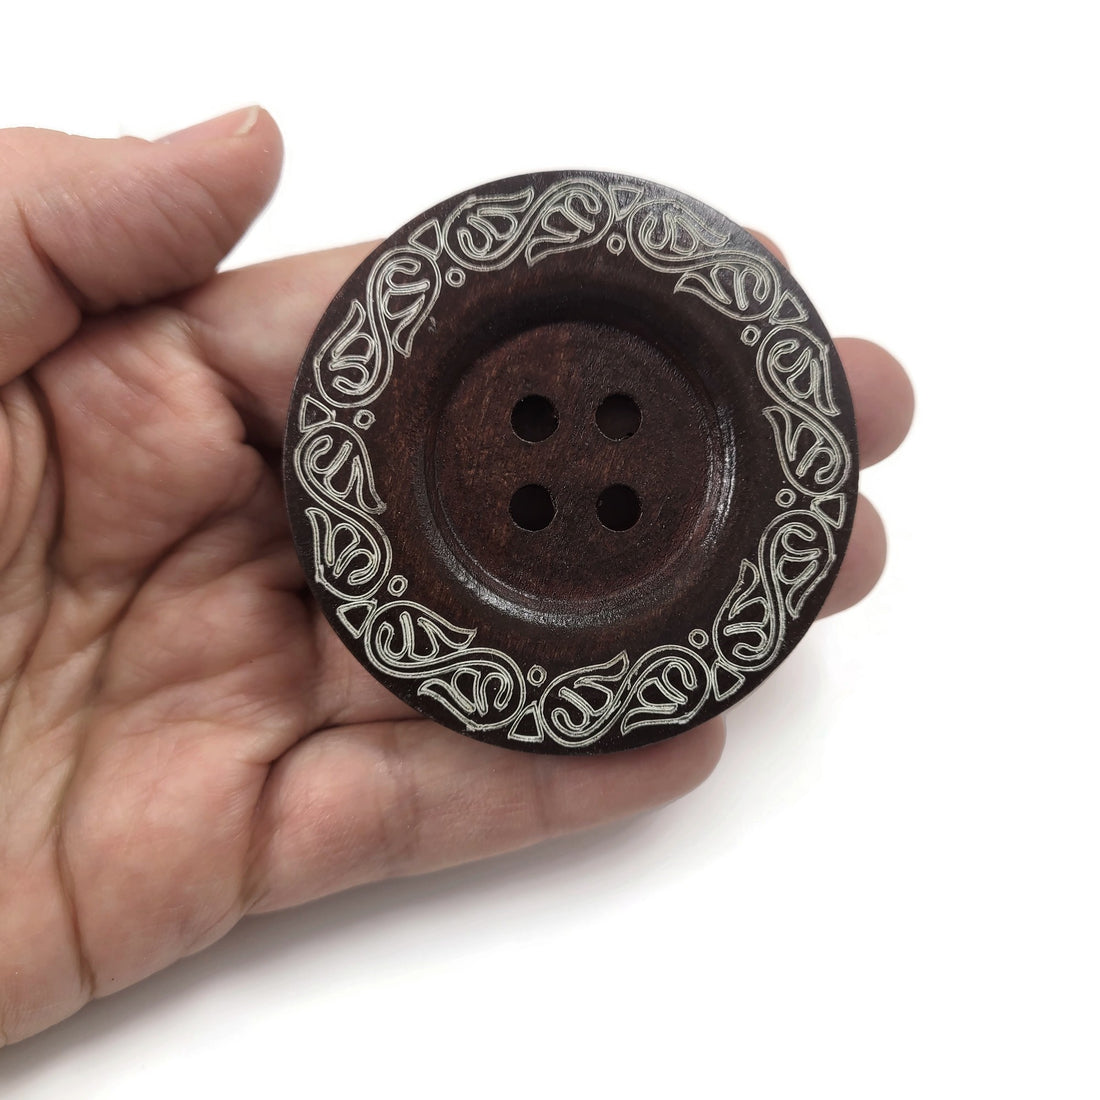 Extra large button - 3 wooden button 60mm (2 3/8") - vine pattern